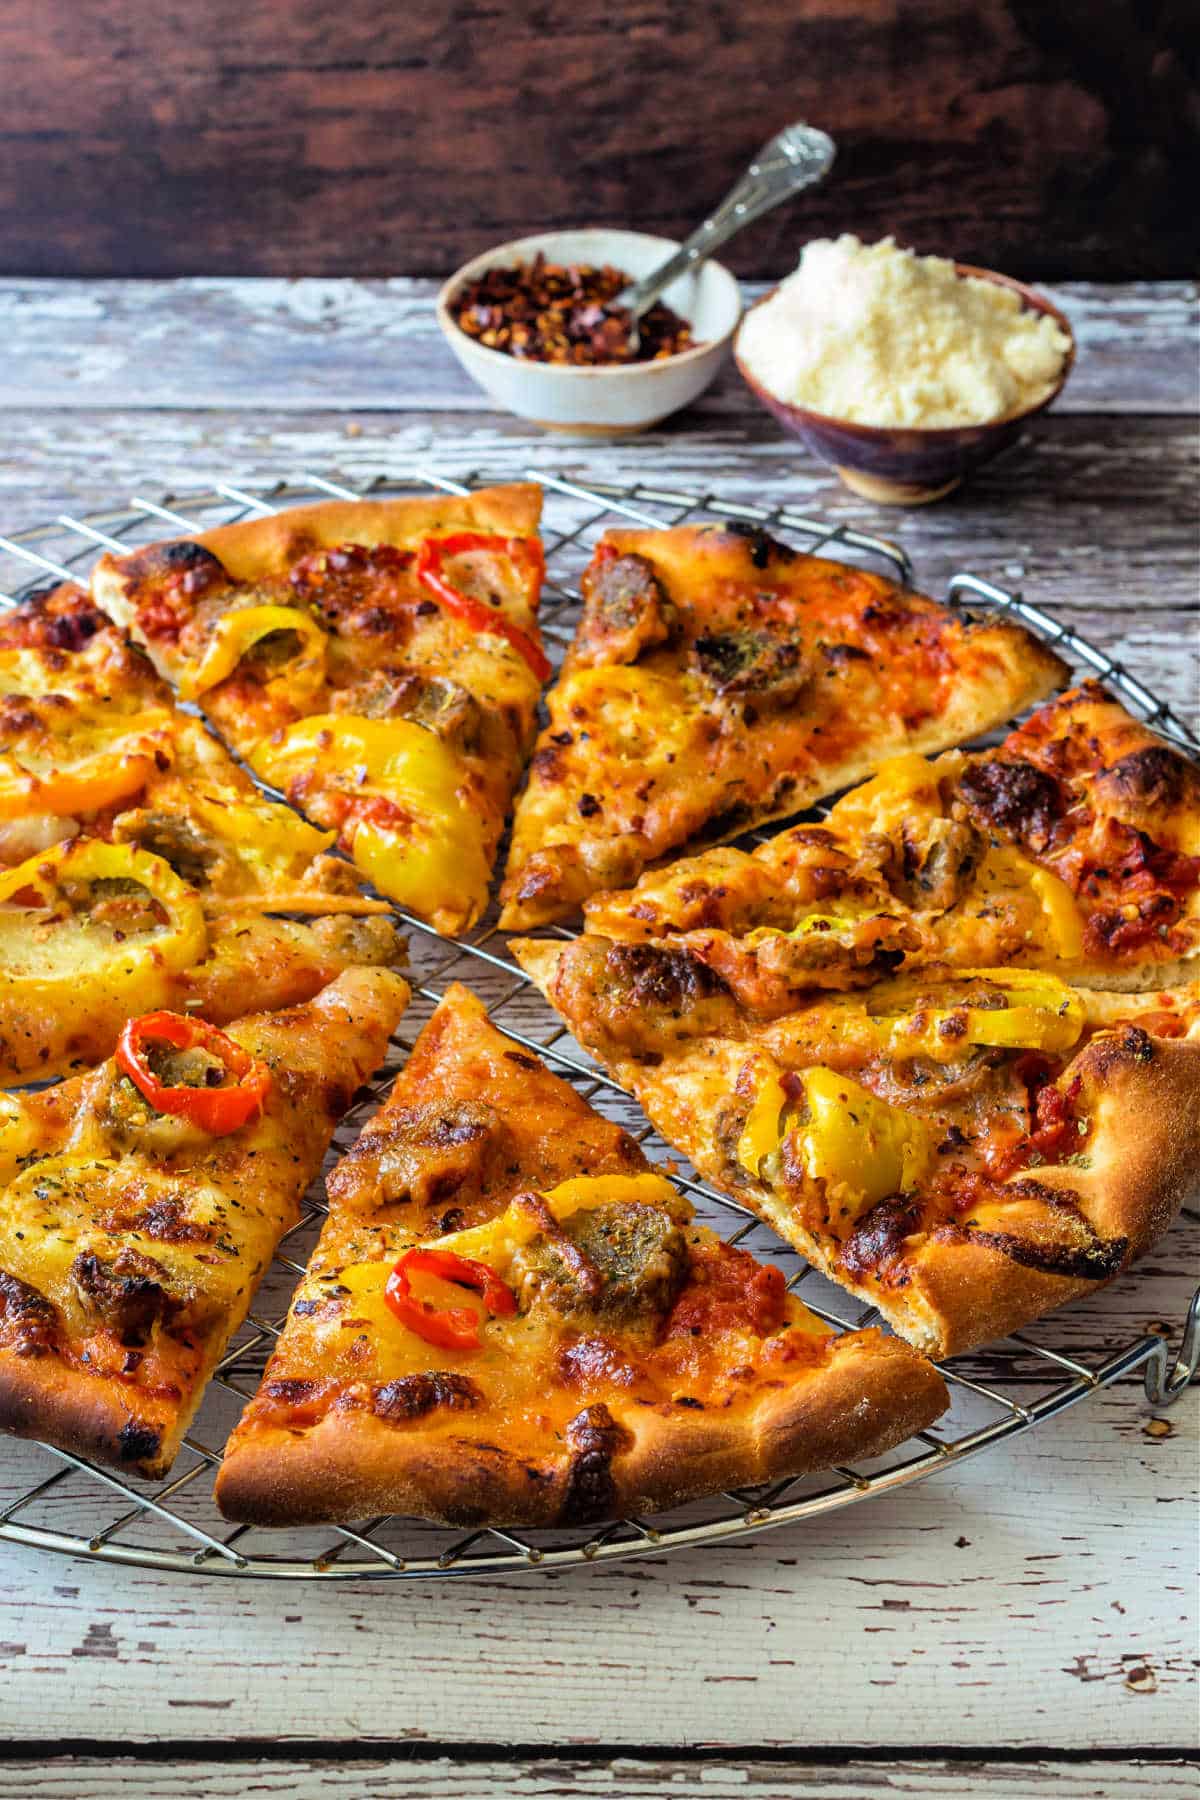 A whole, thin-crust pizza topped lightly with pickled peppers and sliced meatballs, cut into eights and resting on a round cooling rack.